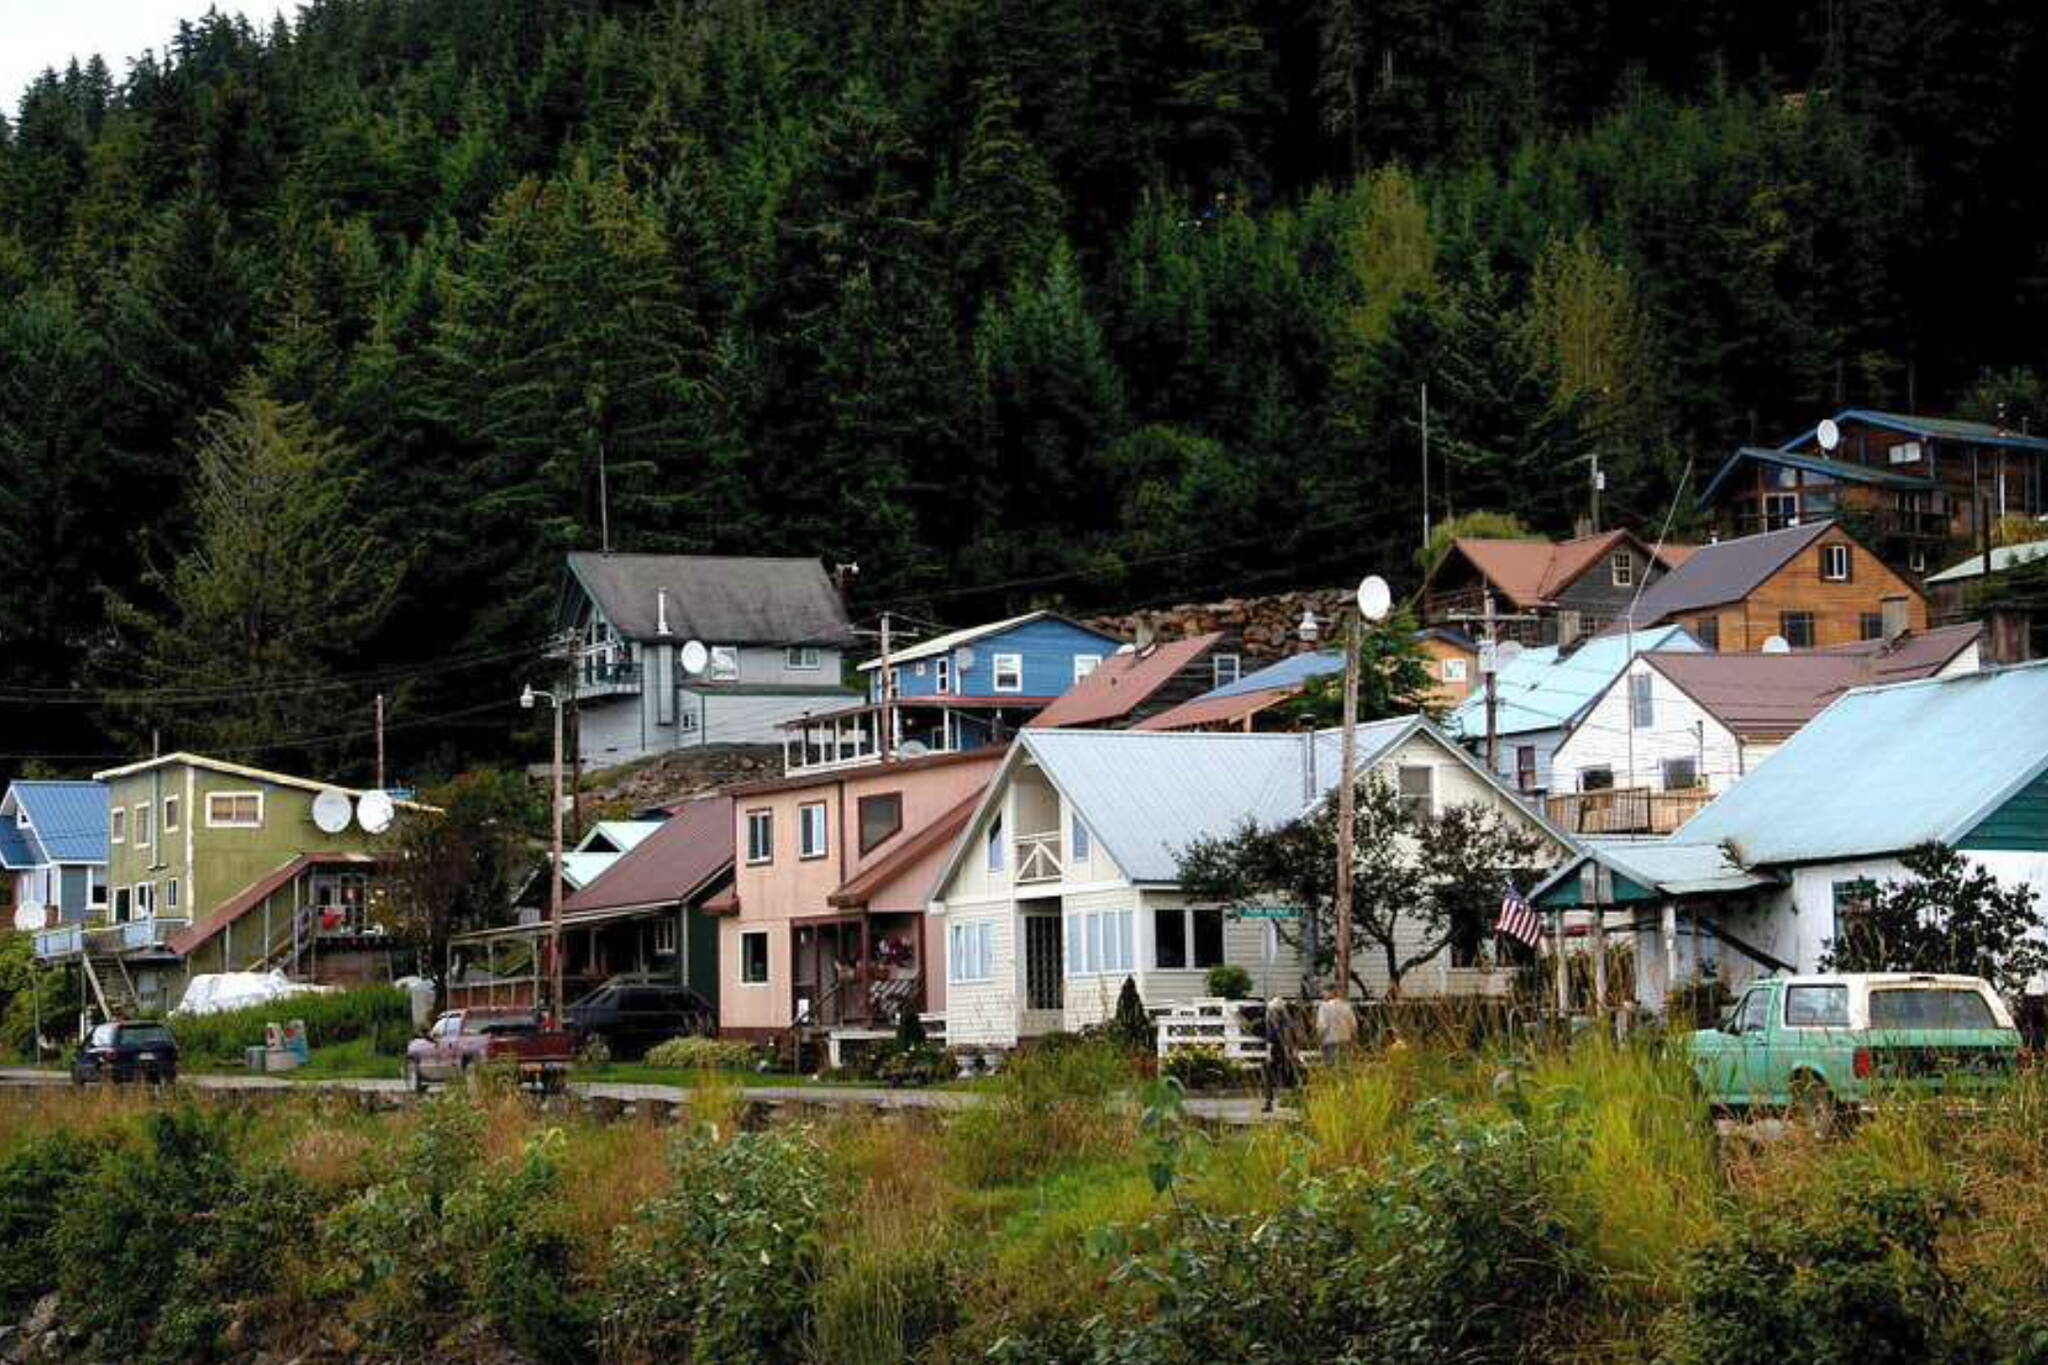 The city of Hoonah, which is petitioning to incorporate as a borough that includes a large surrounding area that includes Glacier Bay and a few tiny communities. (Alaska Department of Commerce, Community and Economic Development photo)